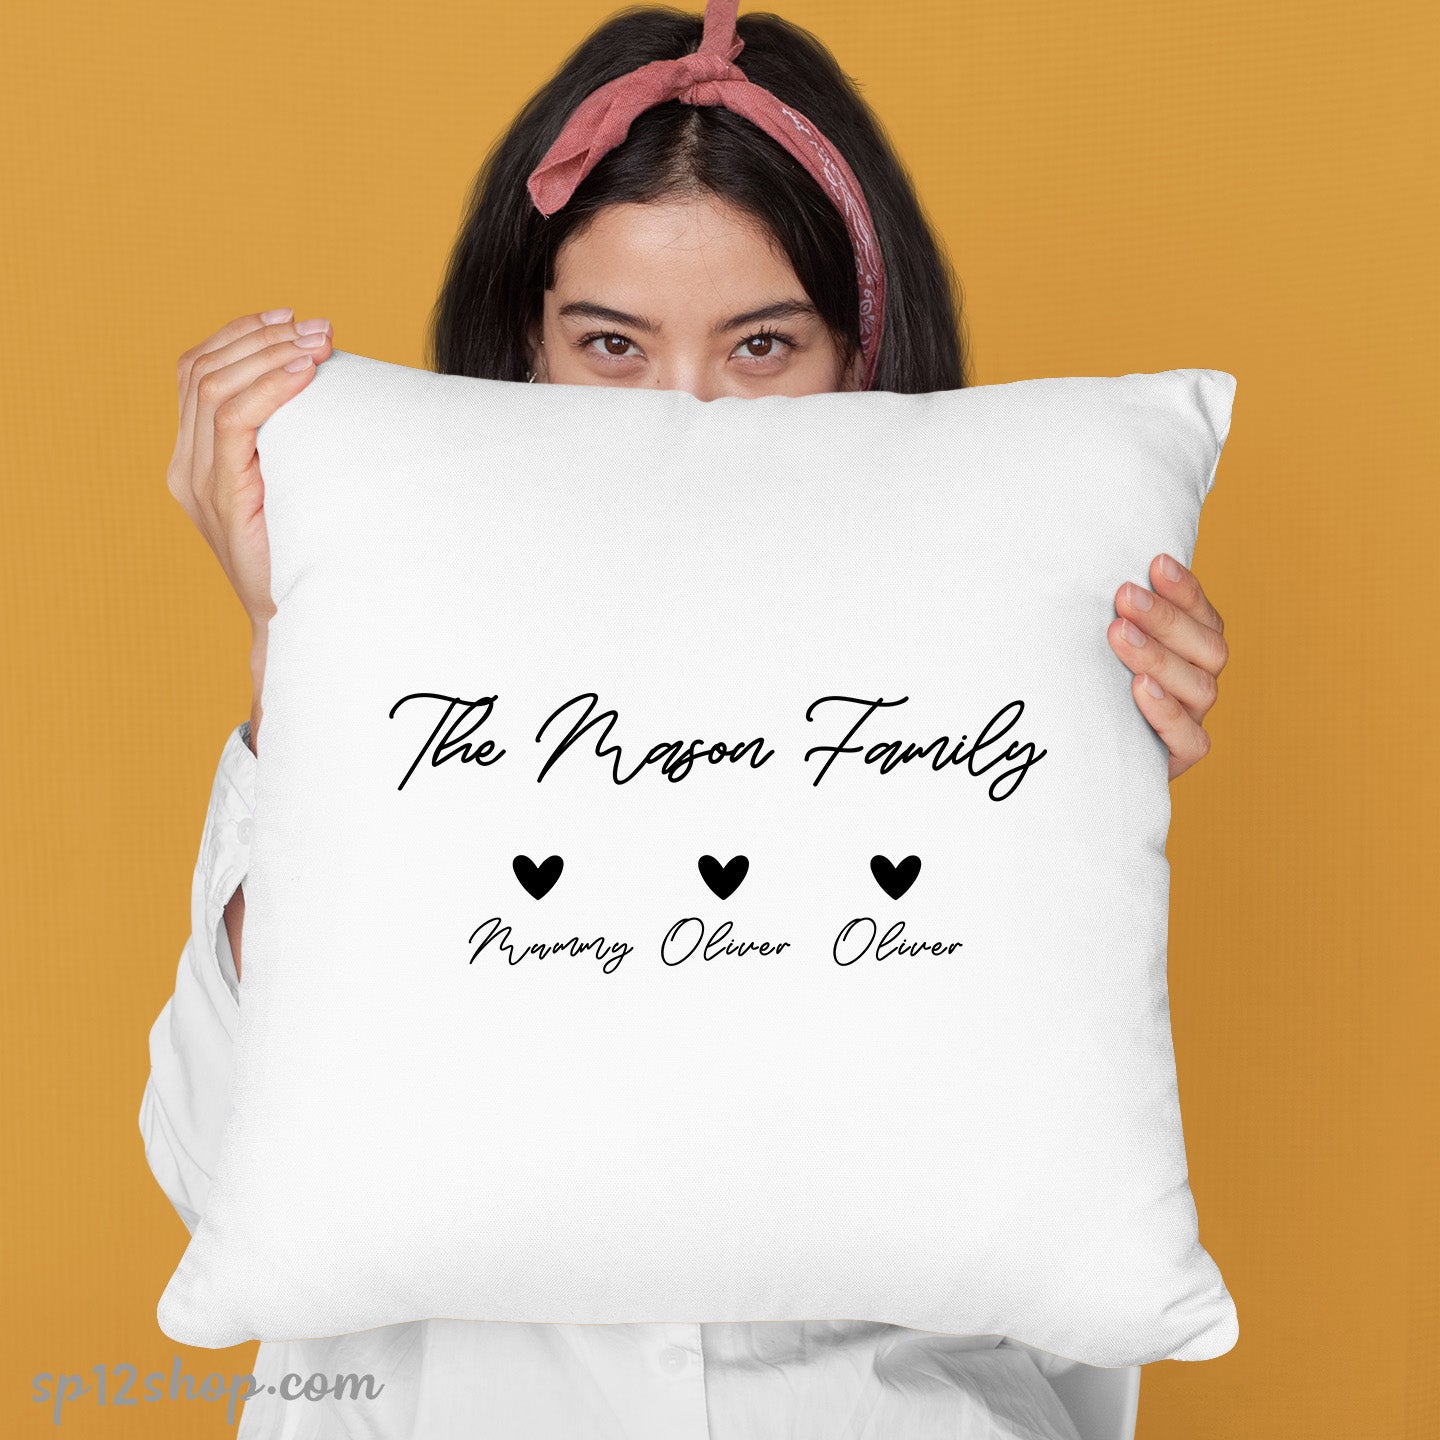 personalised-family-cushion-cover